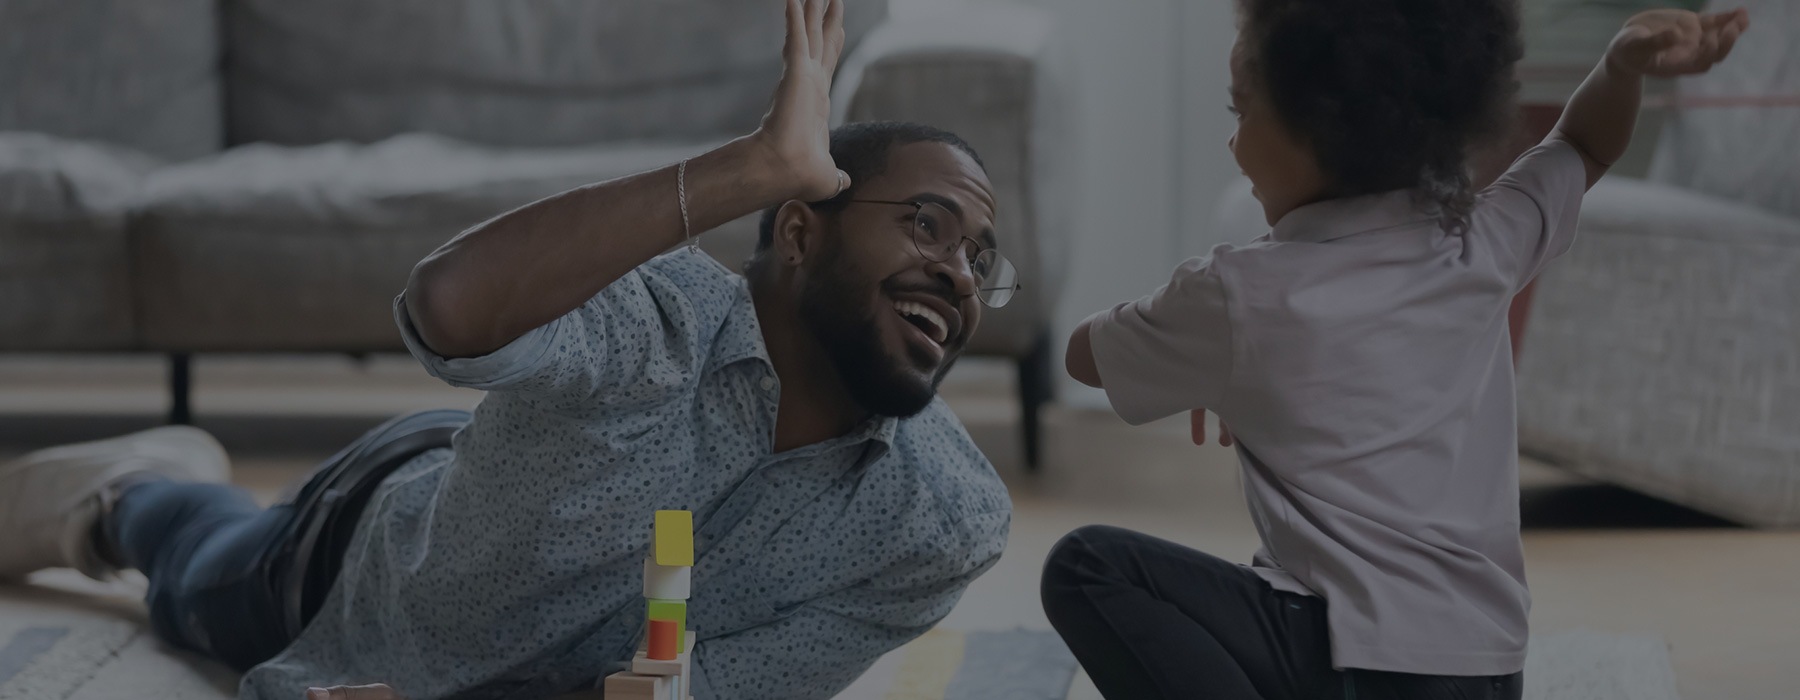 lifestyle image of a man high-fiving a child in a living room